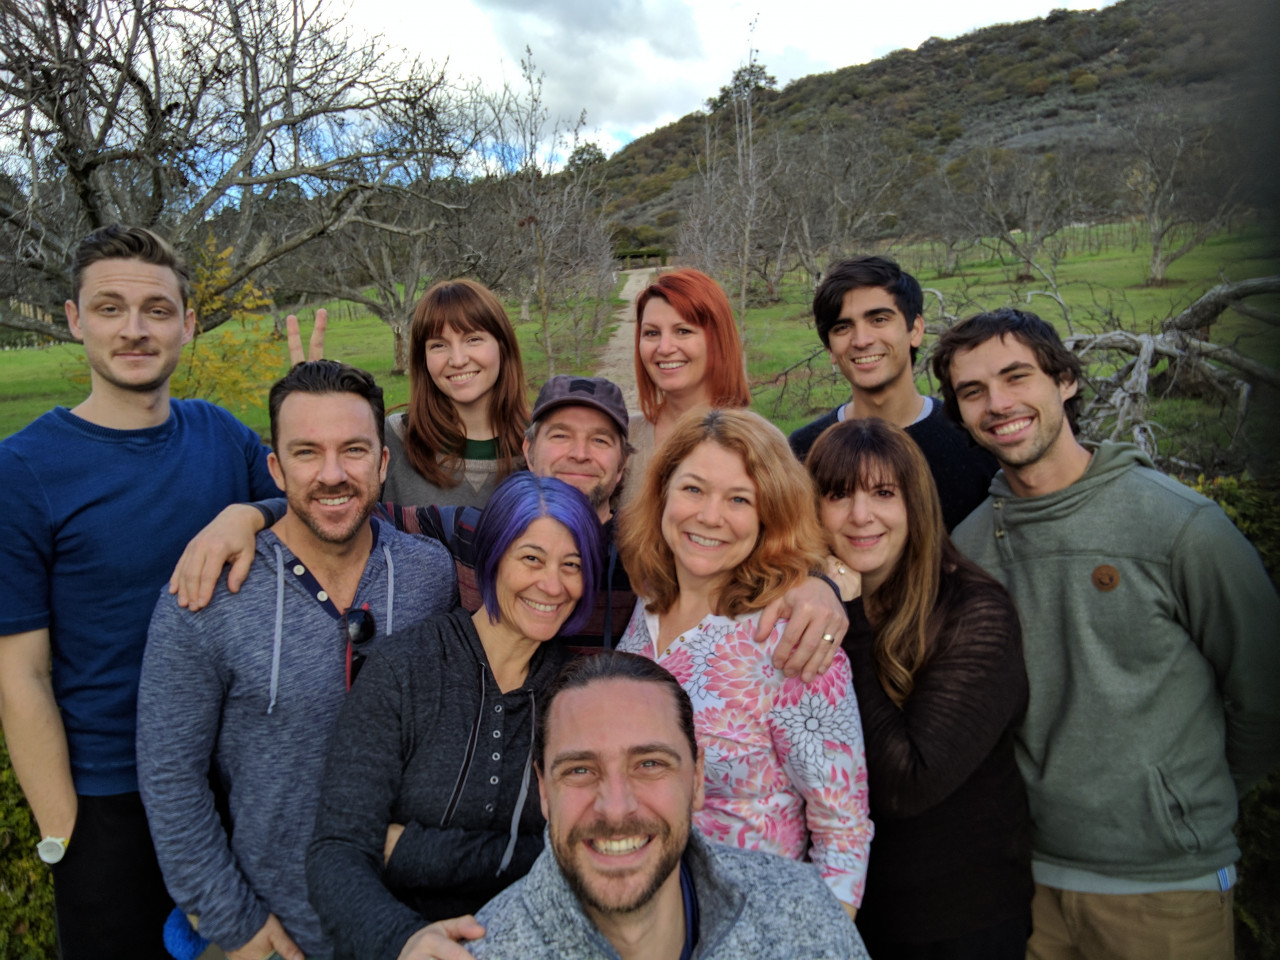 A group picture of smiling Primitive Spark people in Ojai, California in a lush wooded area.